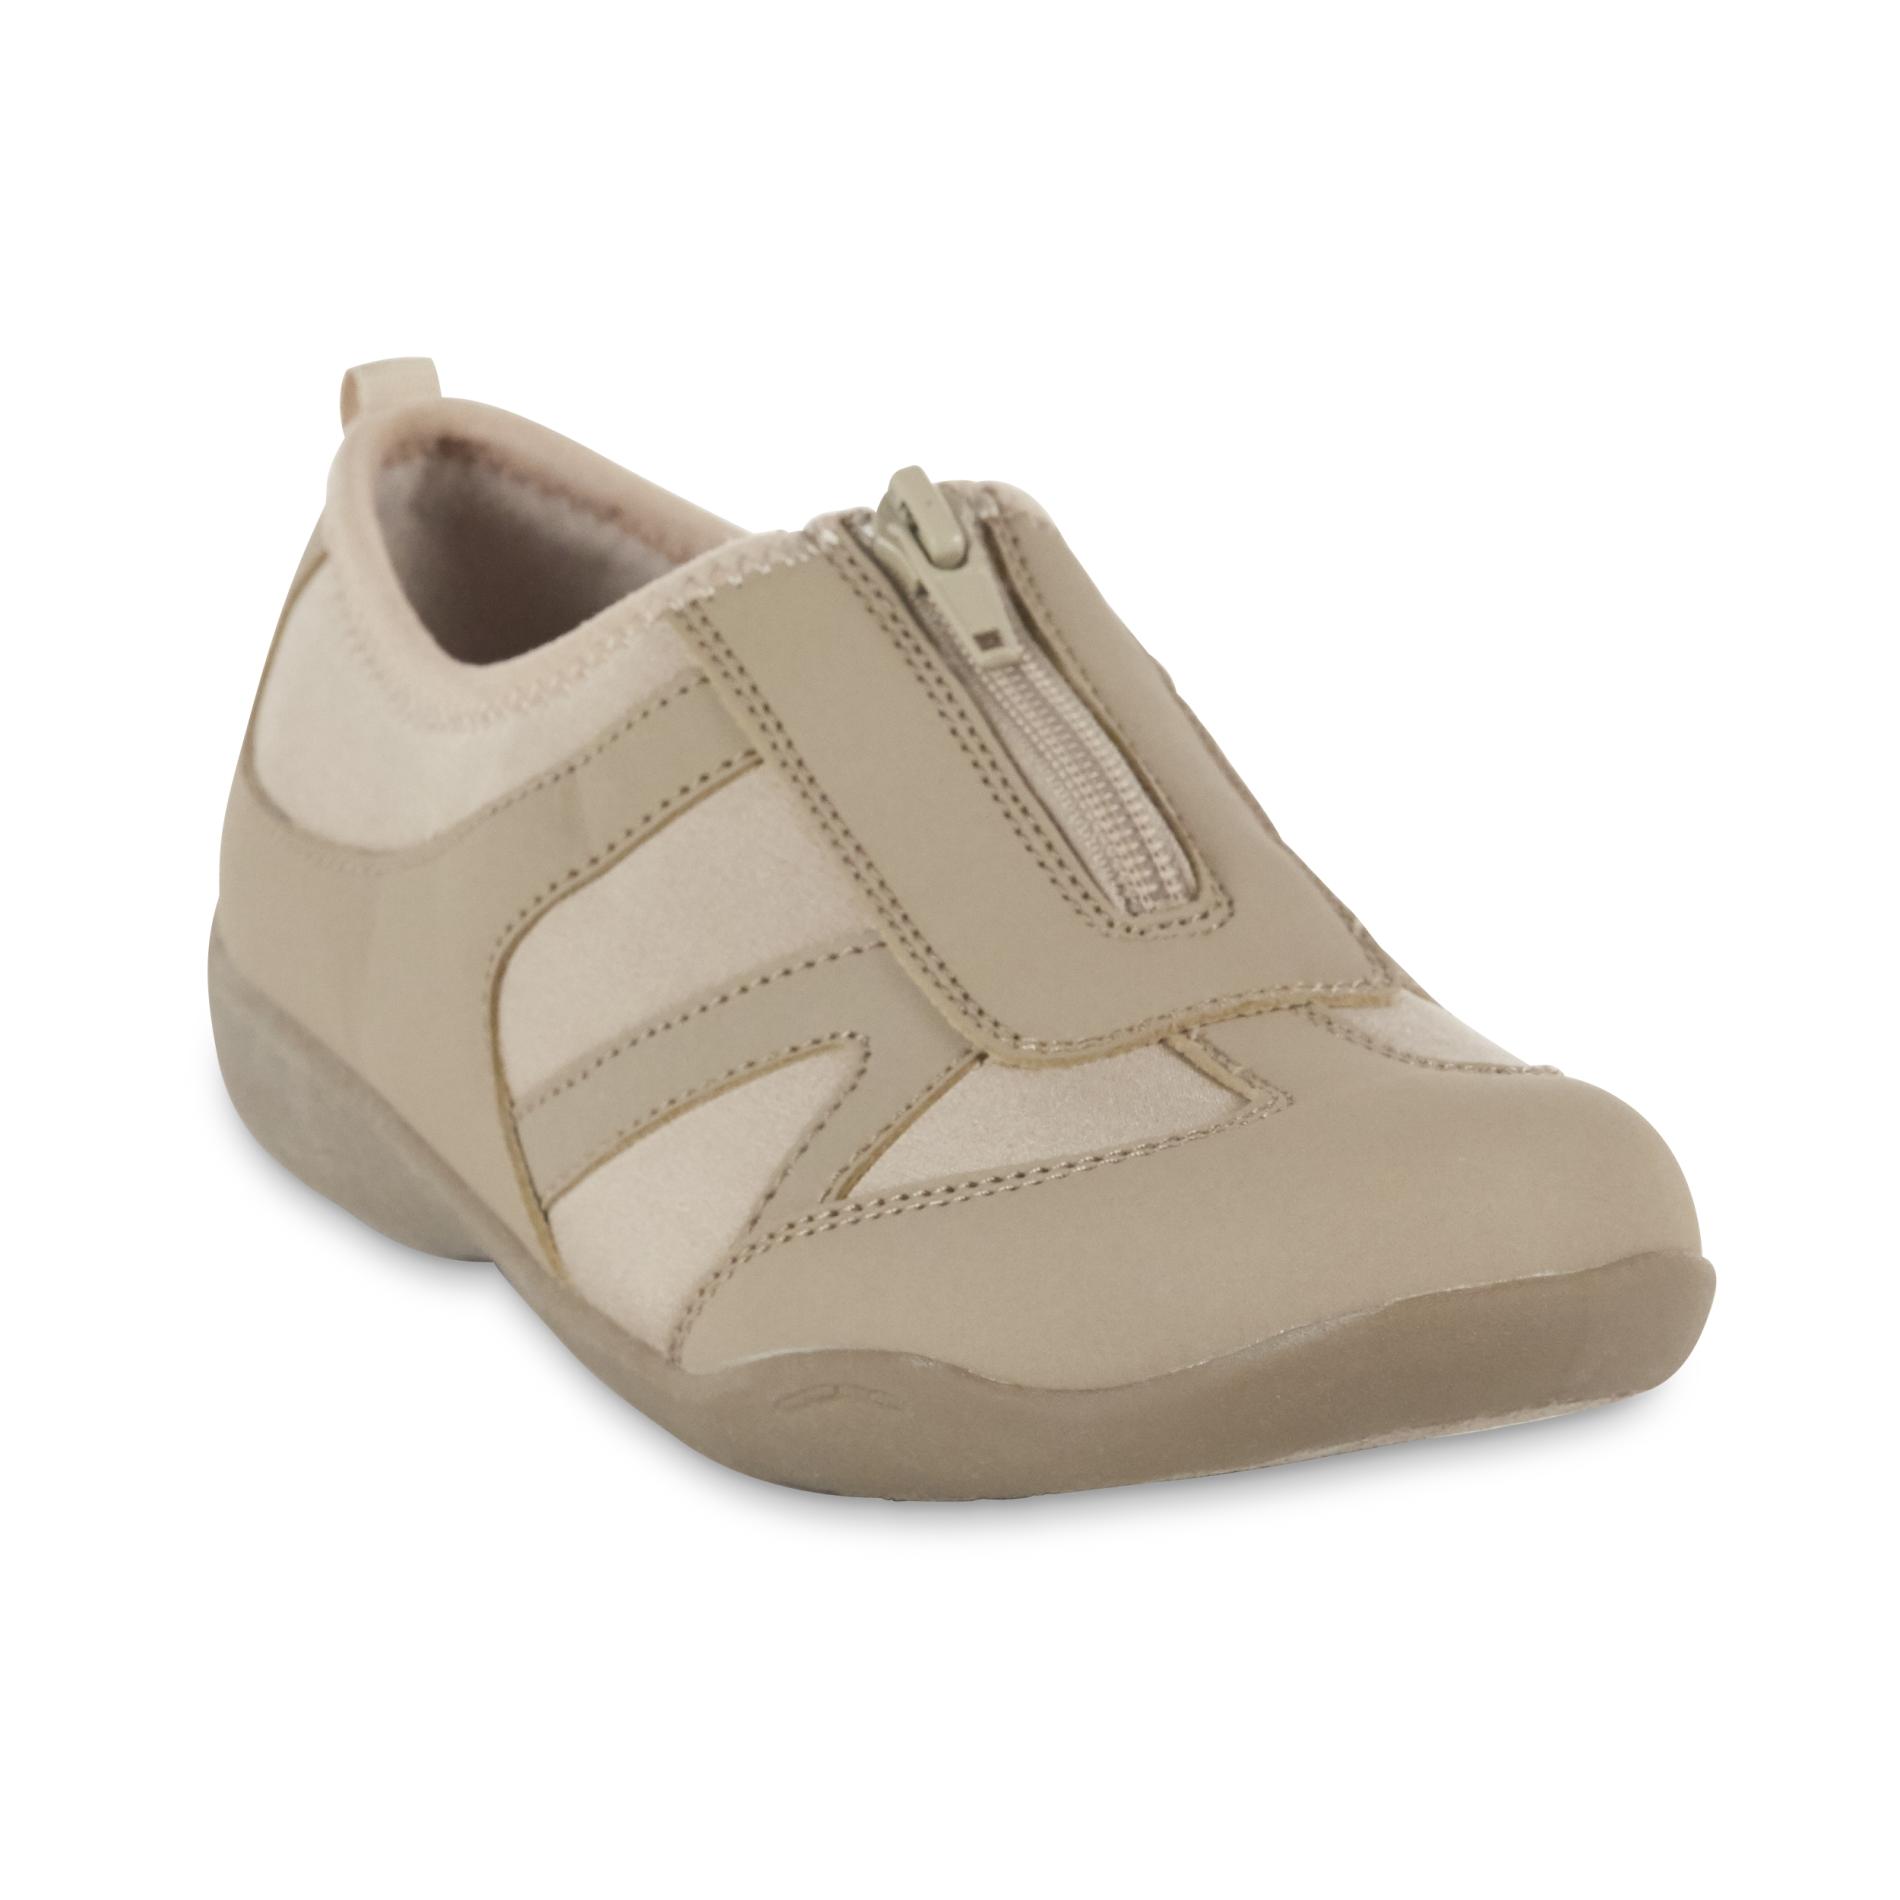 Basic Editions Women's Memory Casual Sneaker - Taupe